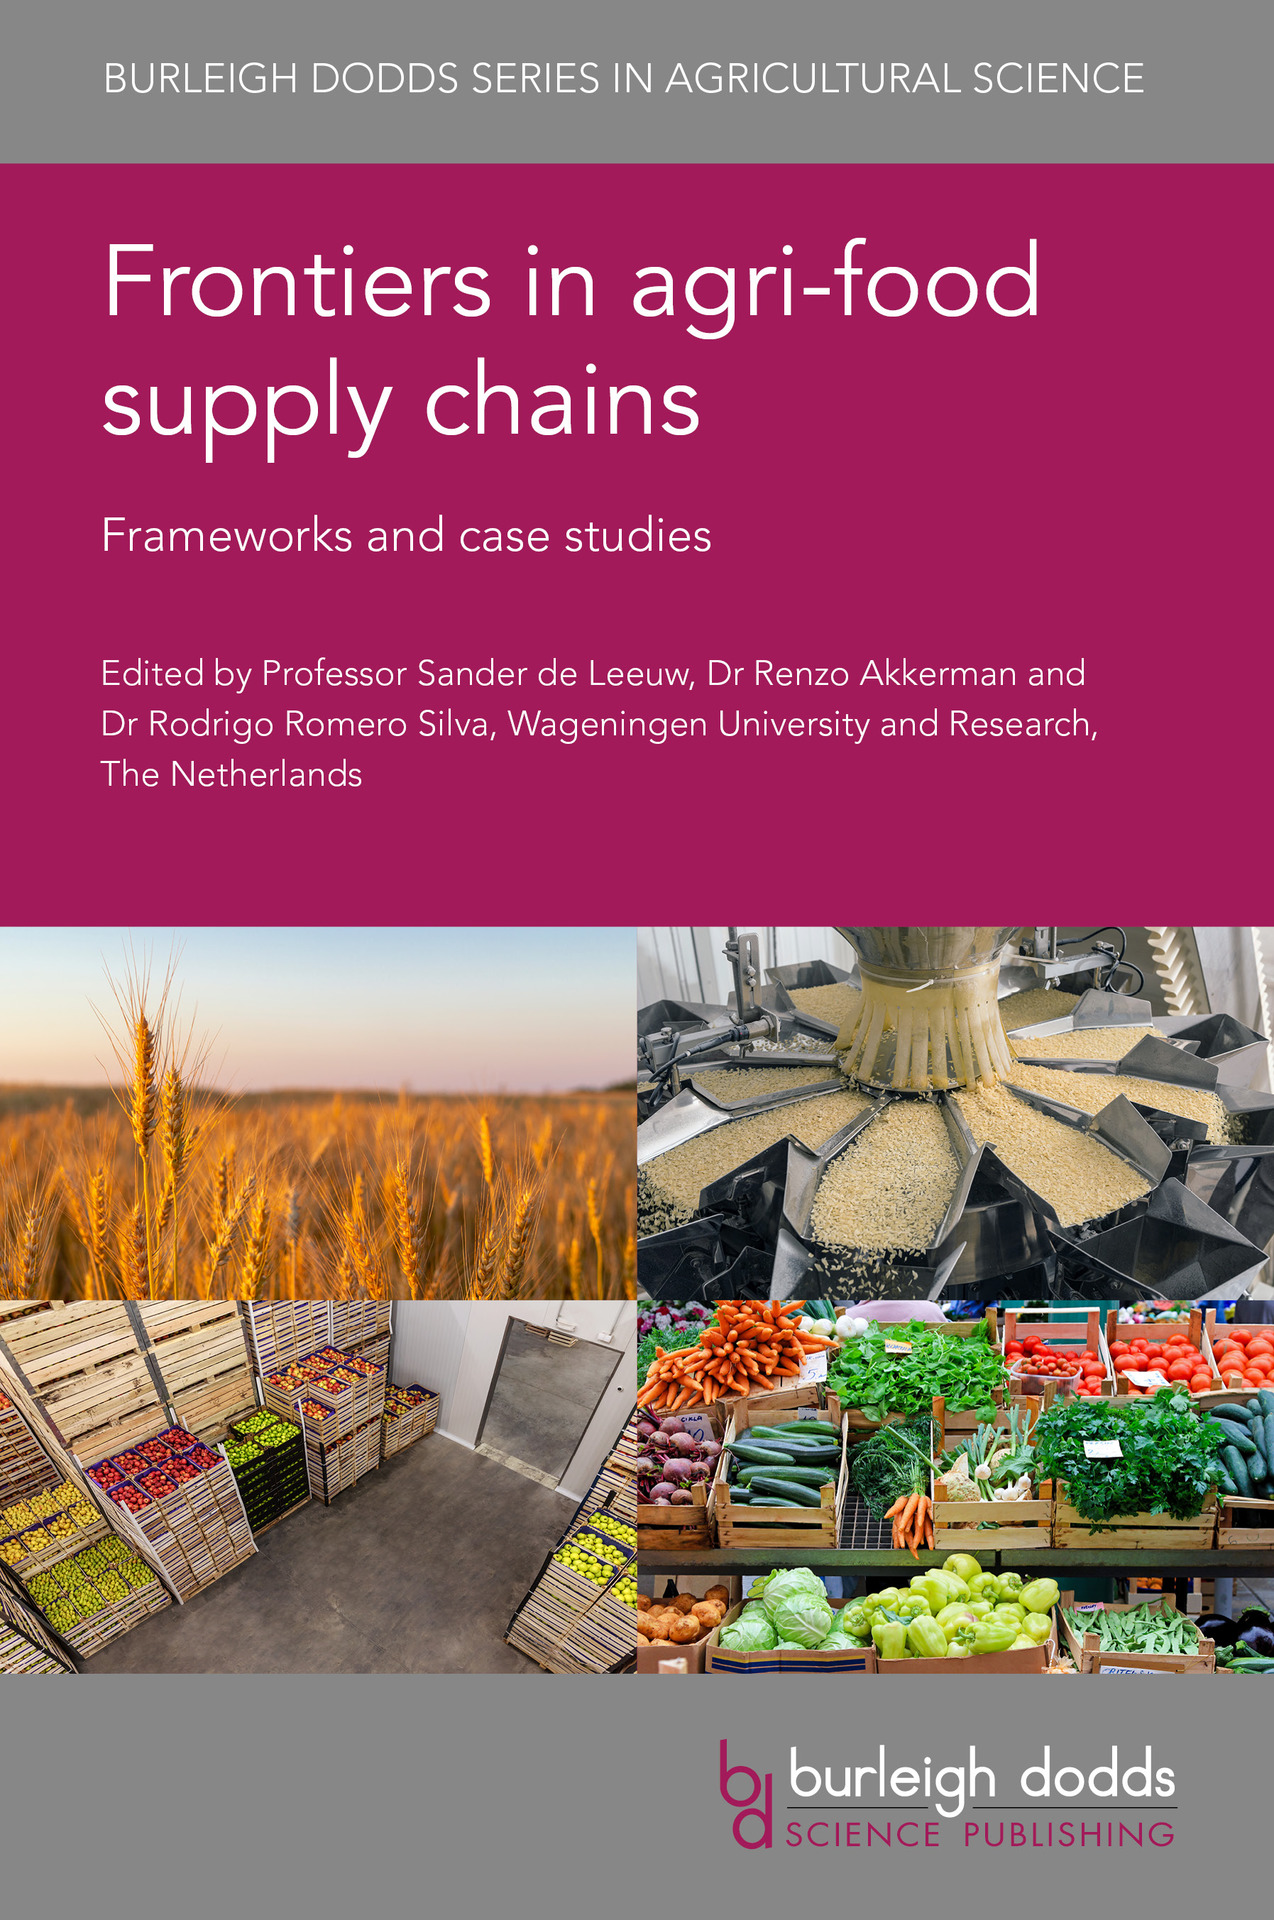 book cover image, four images, wheat in a field, pasta being processed in a factory, horticultural products stored in a cold storage, fruit and vegetables being sold at a market